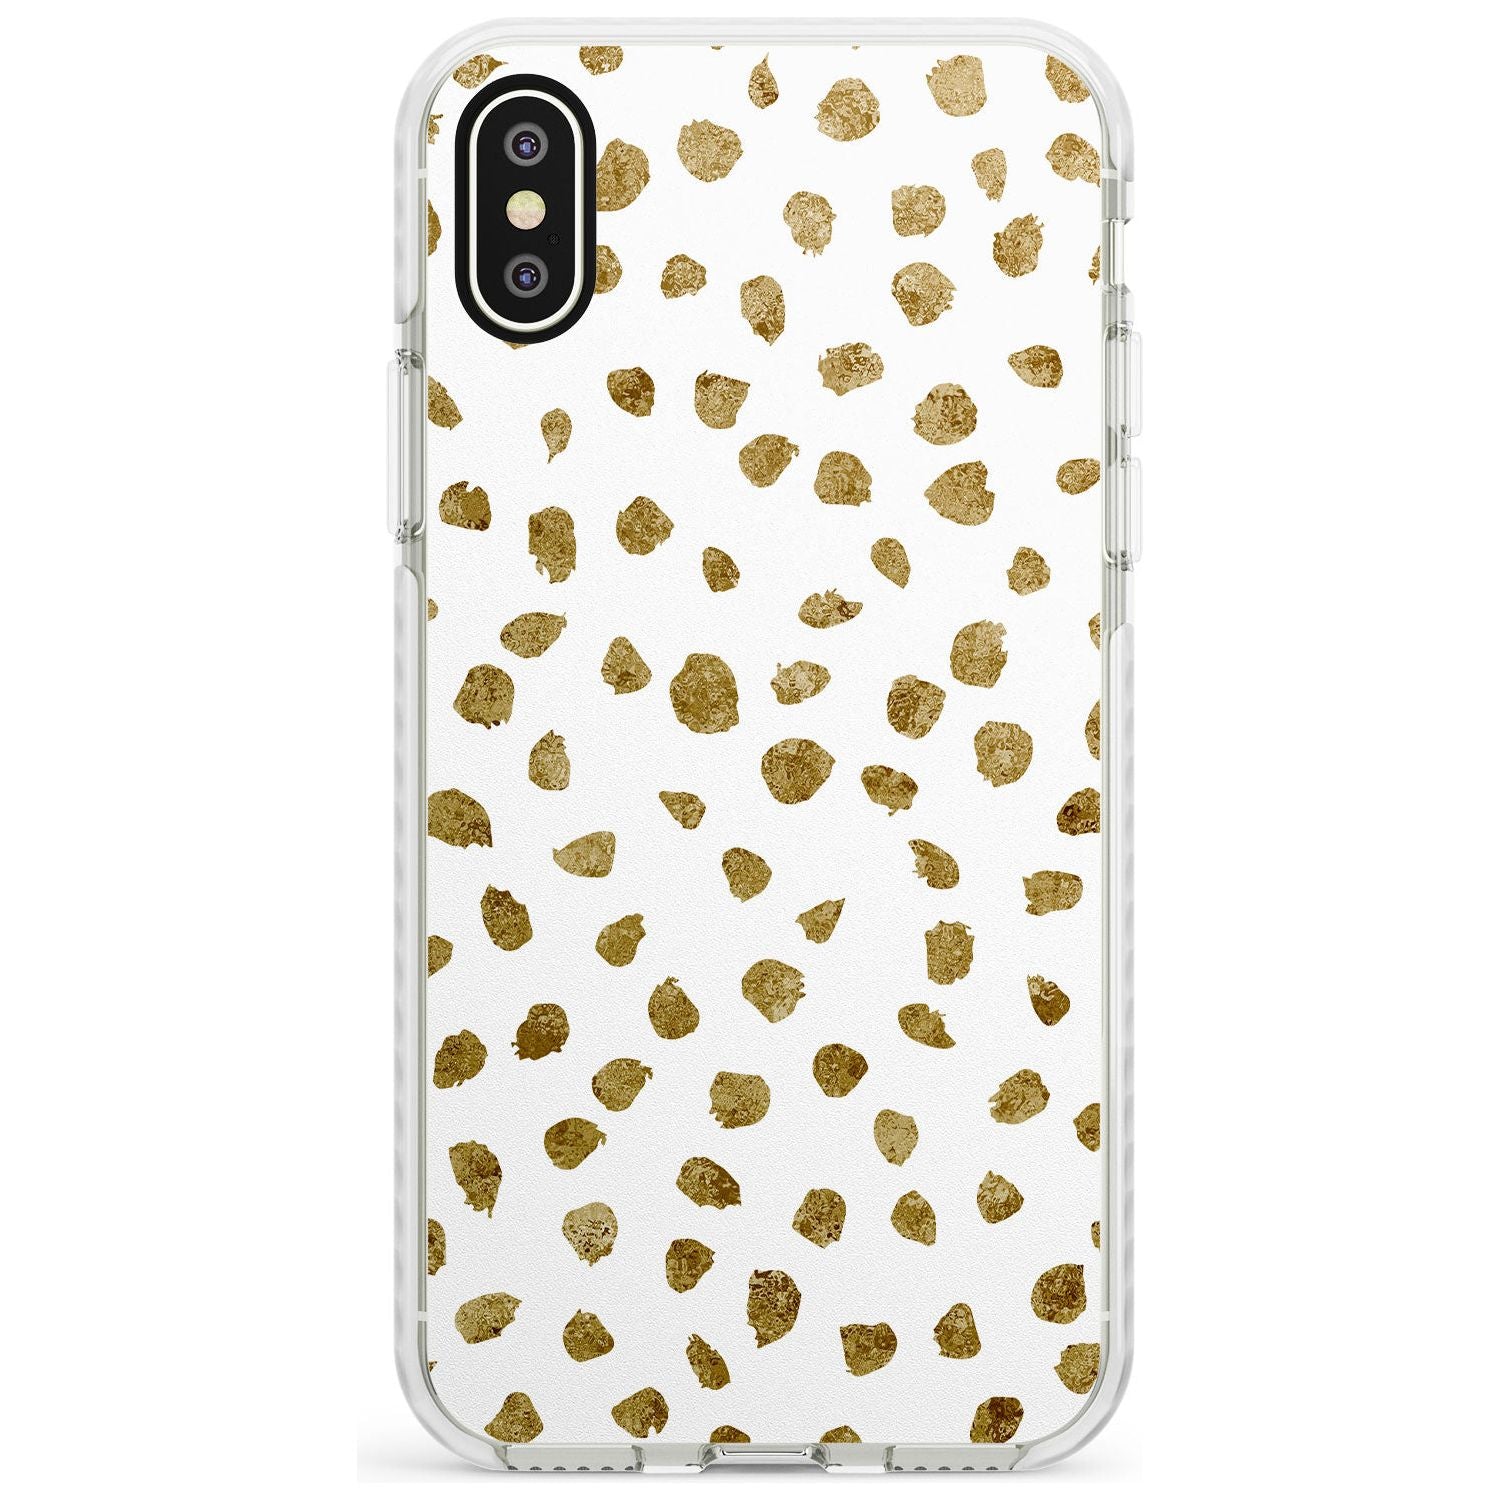 Gold Look on White Dalmatian Polka Dot Spots Impact Phone Case for iPhone X XS Max XR